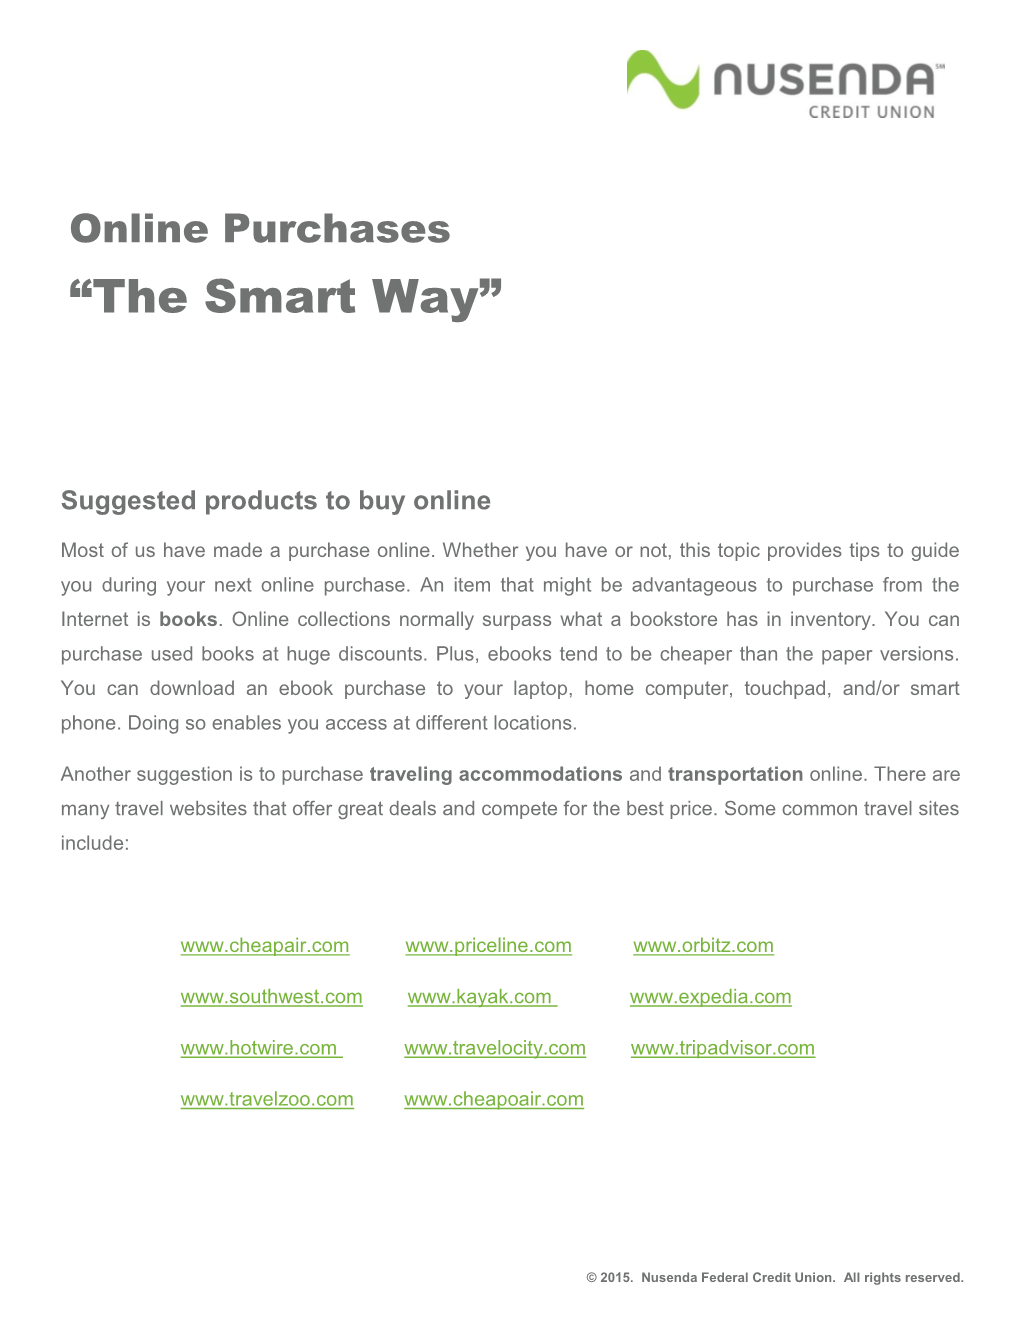 Online Purchases “The Smart Way”